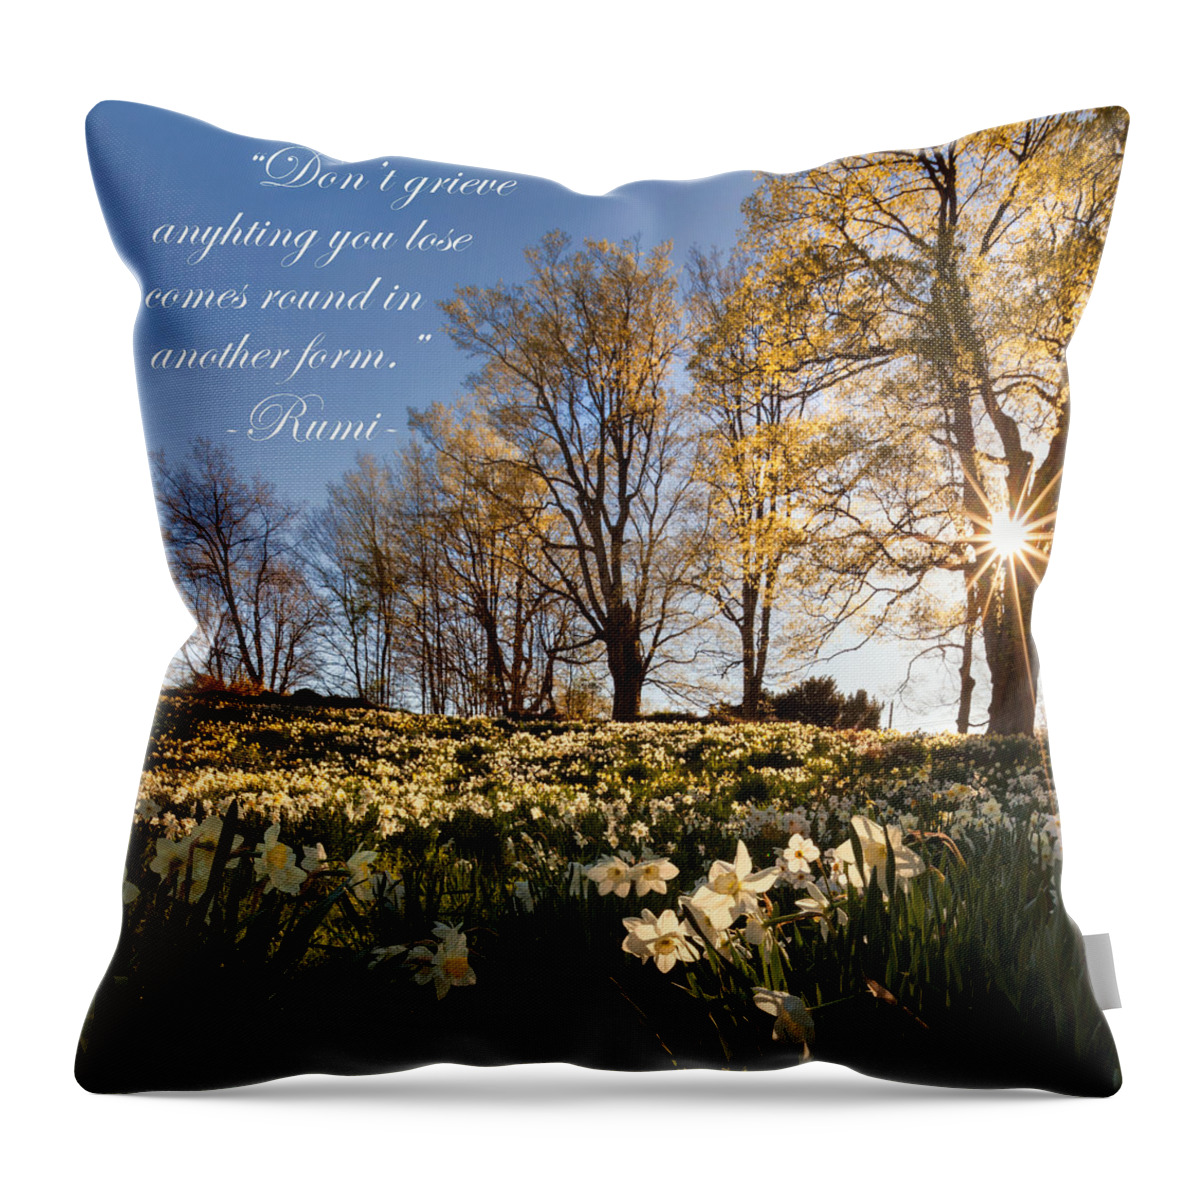 Rumi Throw Pillow featuring the photograph Don't Grieve by Bill Wakeley